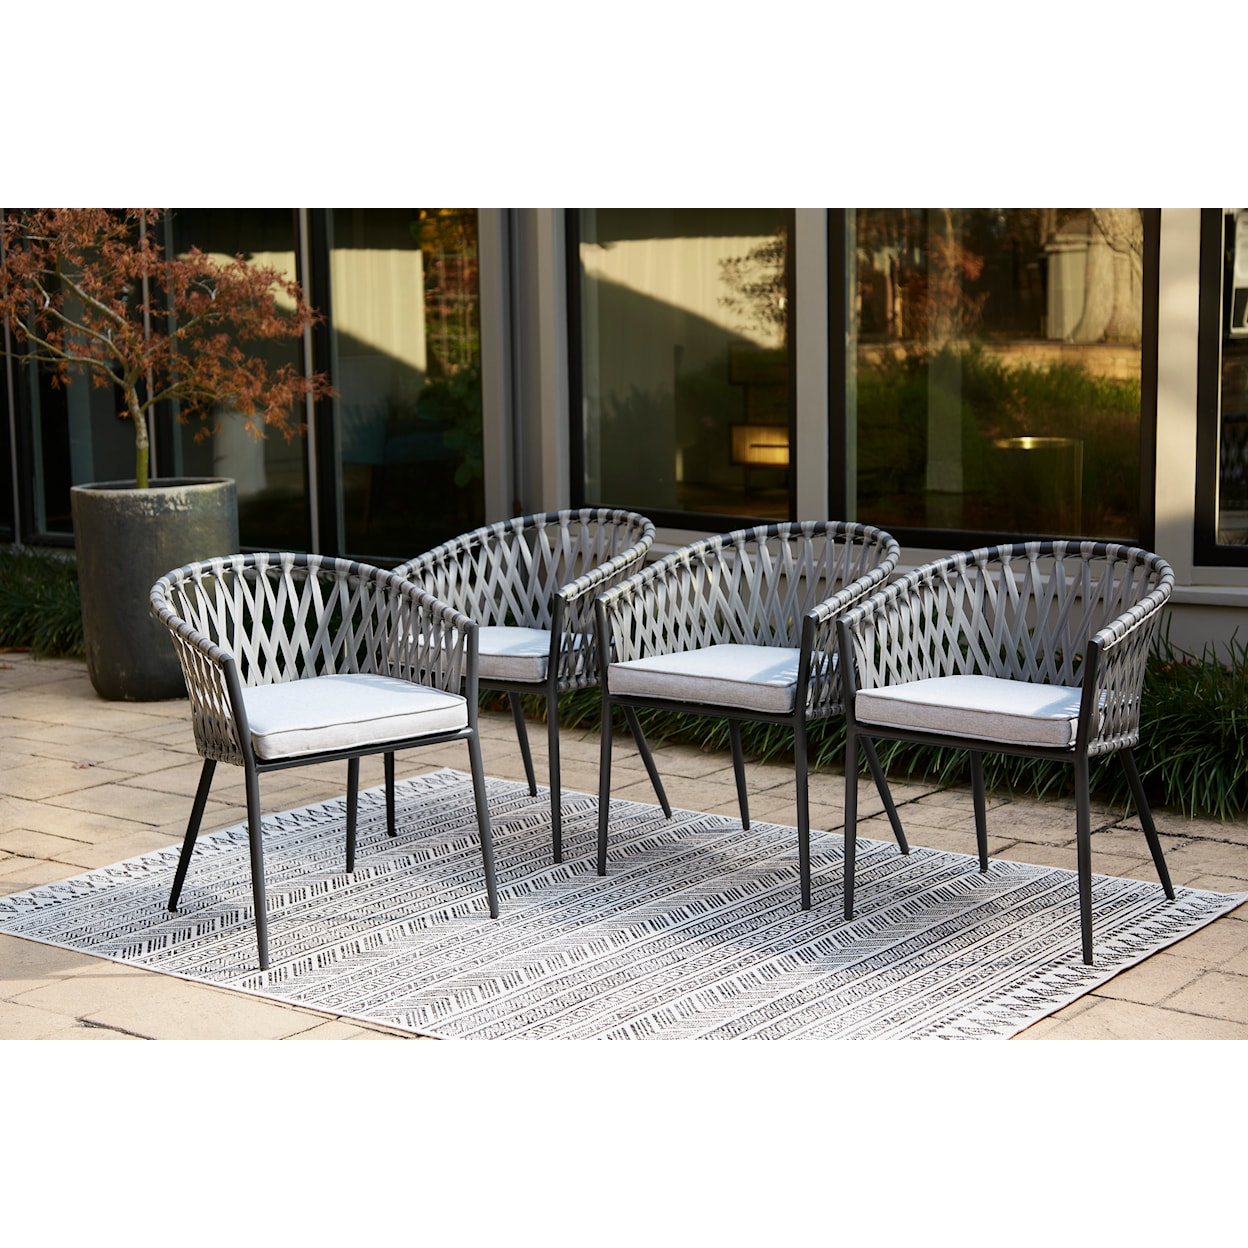 Ashley Furniture Signature Design Palm Bliss Outdoor Dining Chair (Set of 4)